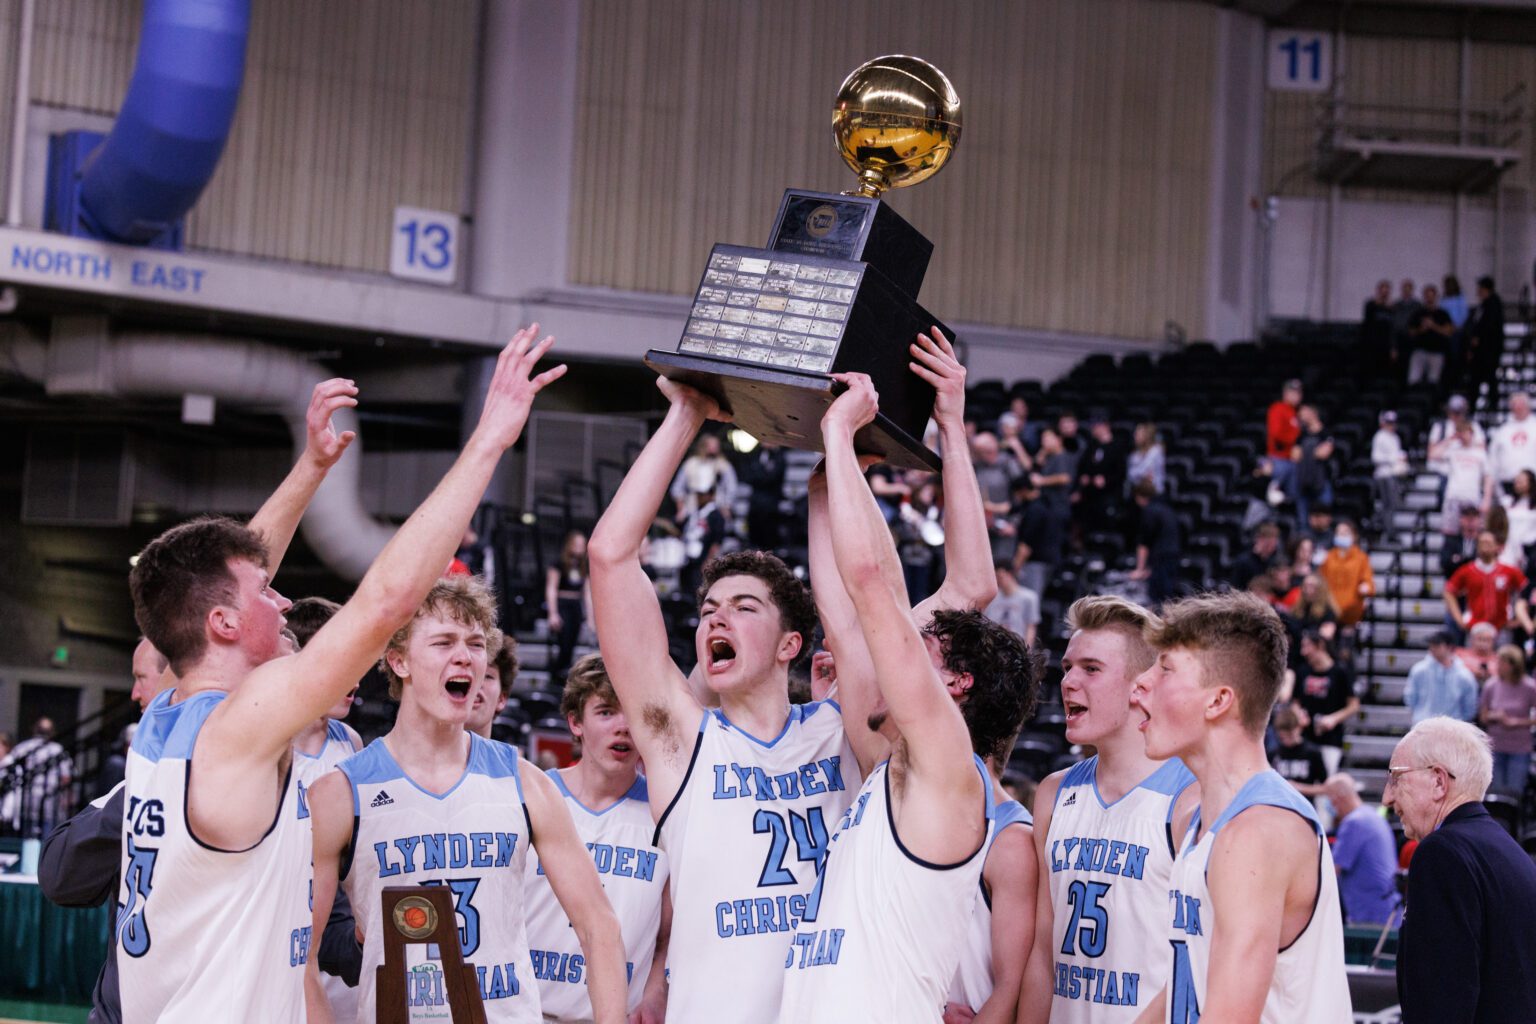 Lynden Christian celebrates with the trophy after the Lyncs beat King's 61-58 in the 1A state championship game at the Yakima Valley SunDome on March 5.